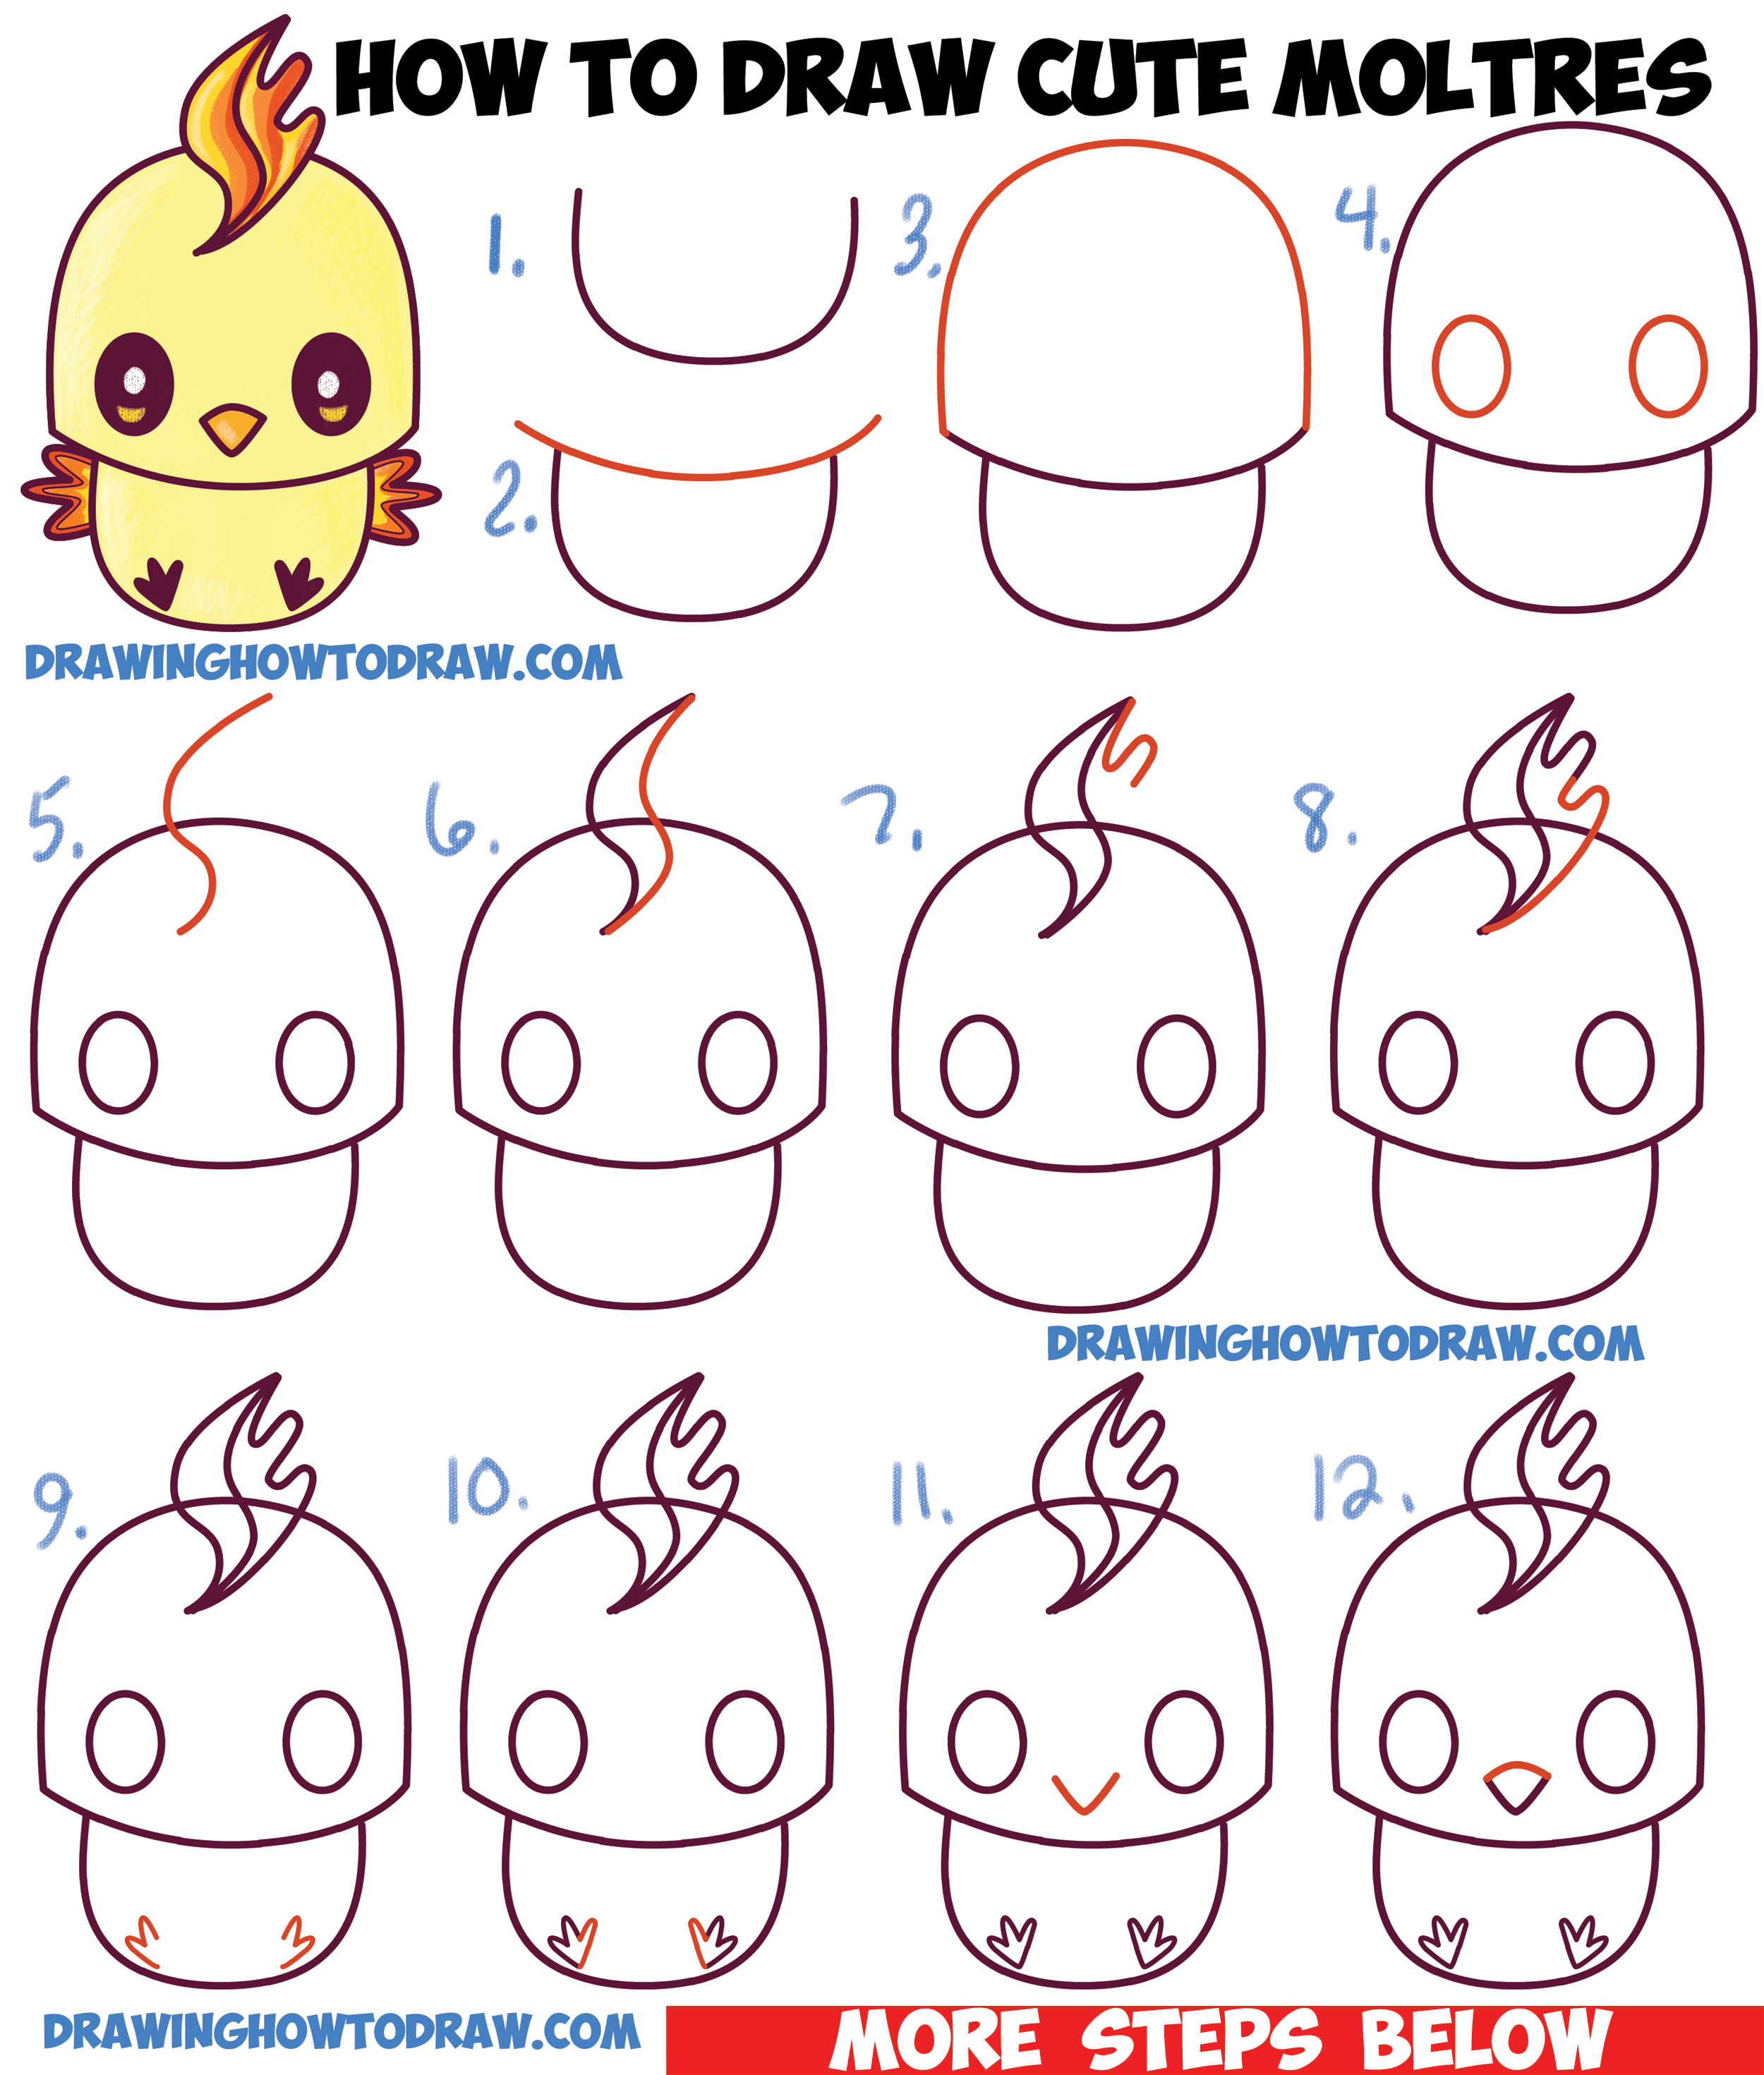 How to Draw Cute / Kawaii / Chibi Moltres from Pokemon in Easy ...